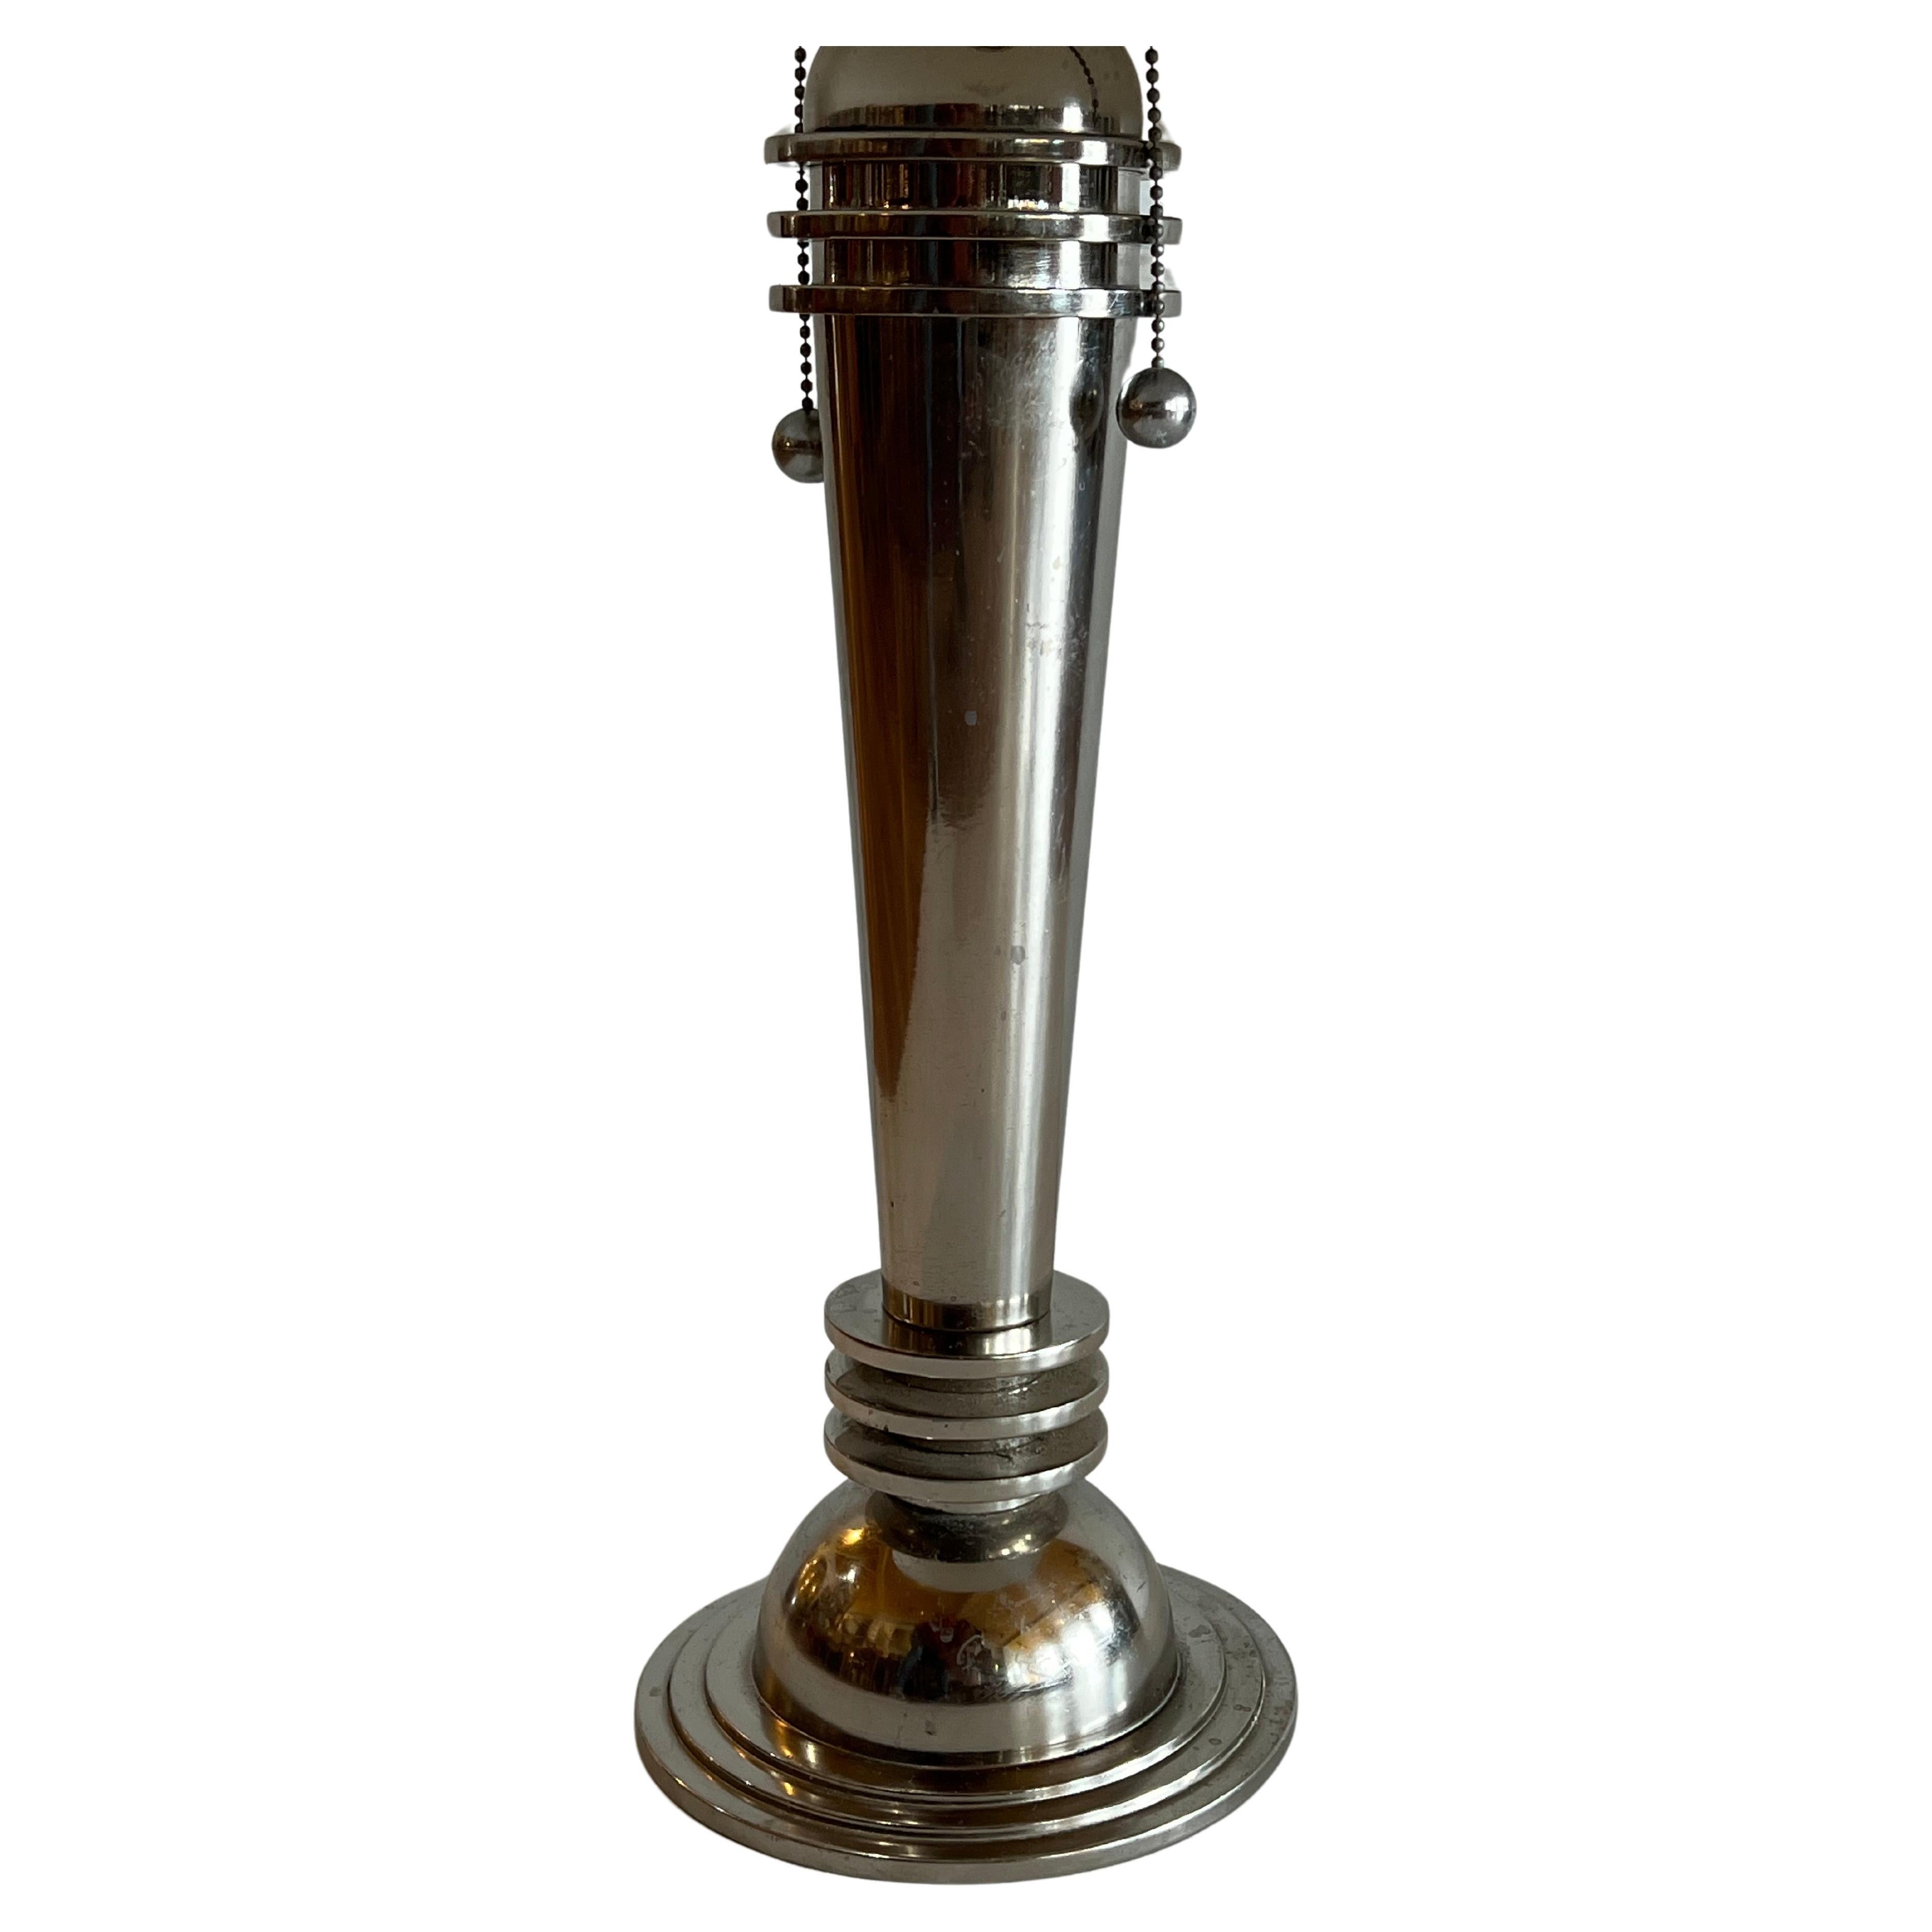 Art Deco Machine Age Majestic Nickel Plated Desk Table Lamp by Woka Lamps  In Good Condition For Sale In San Diego, CA